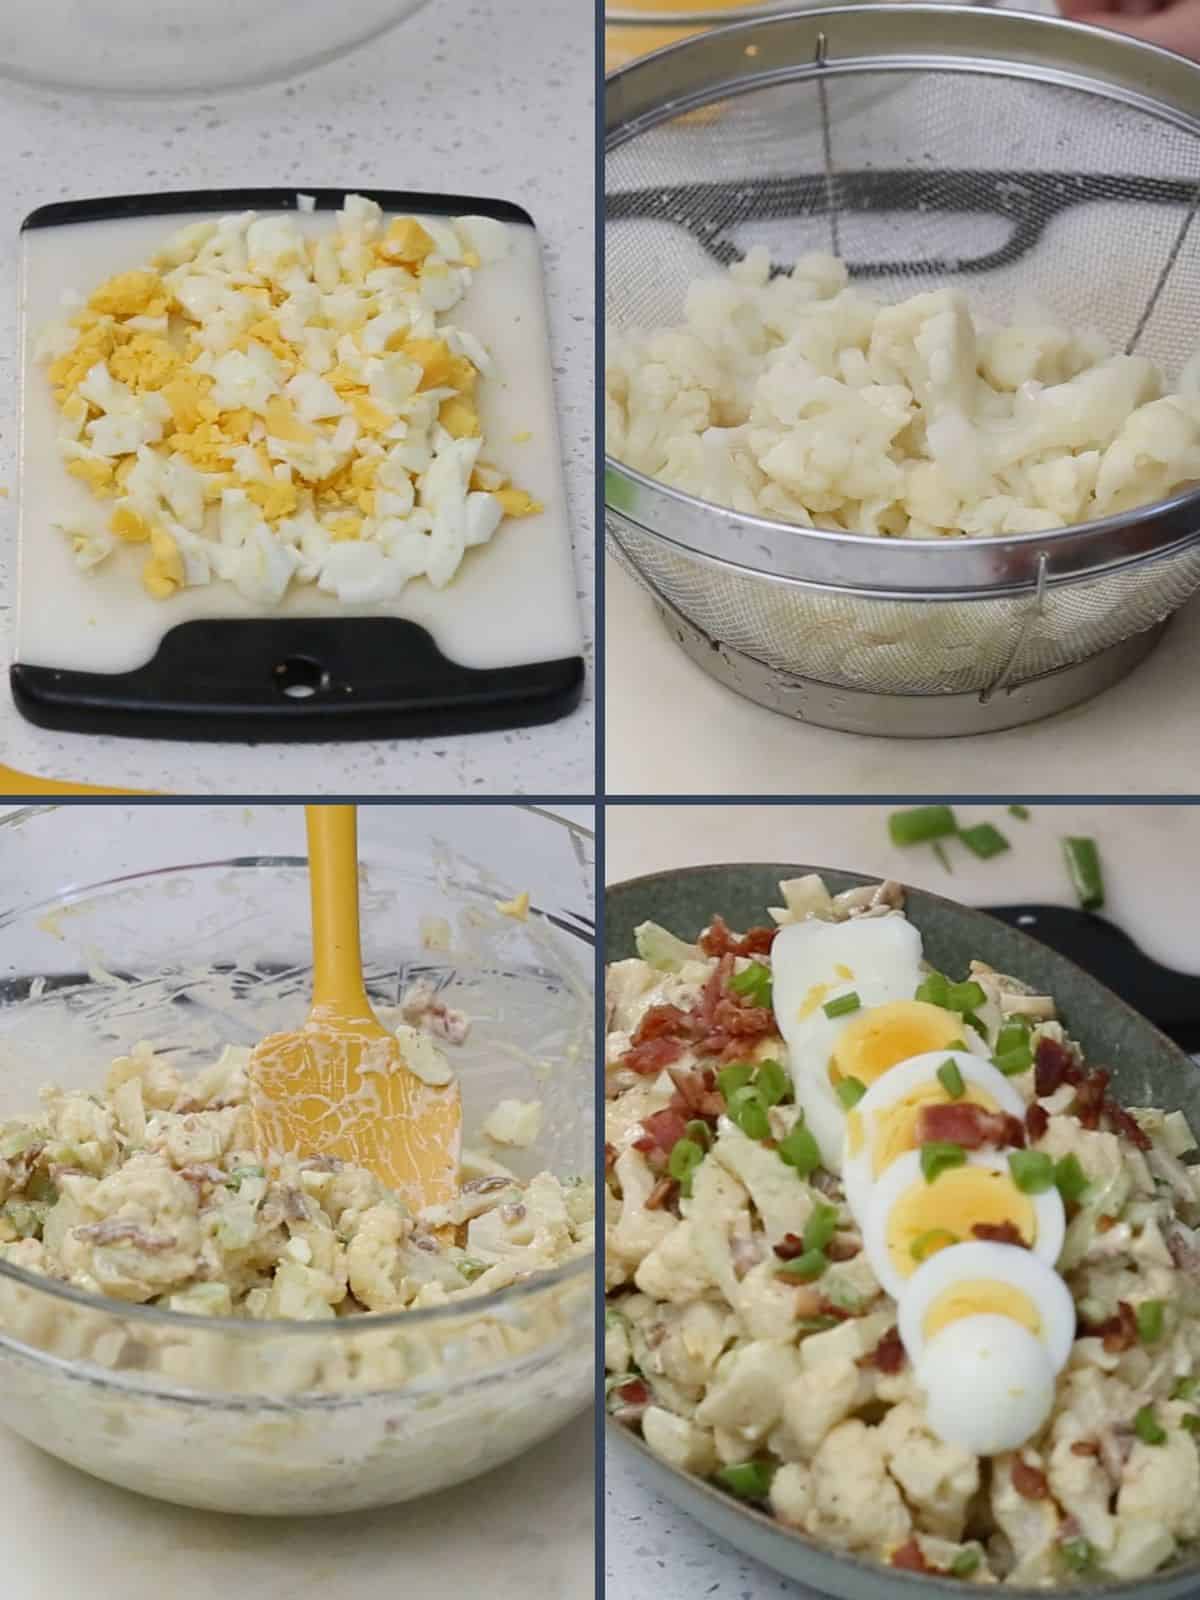 A collage of 4 images showing how to make Cauliflower Potato Salad.